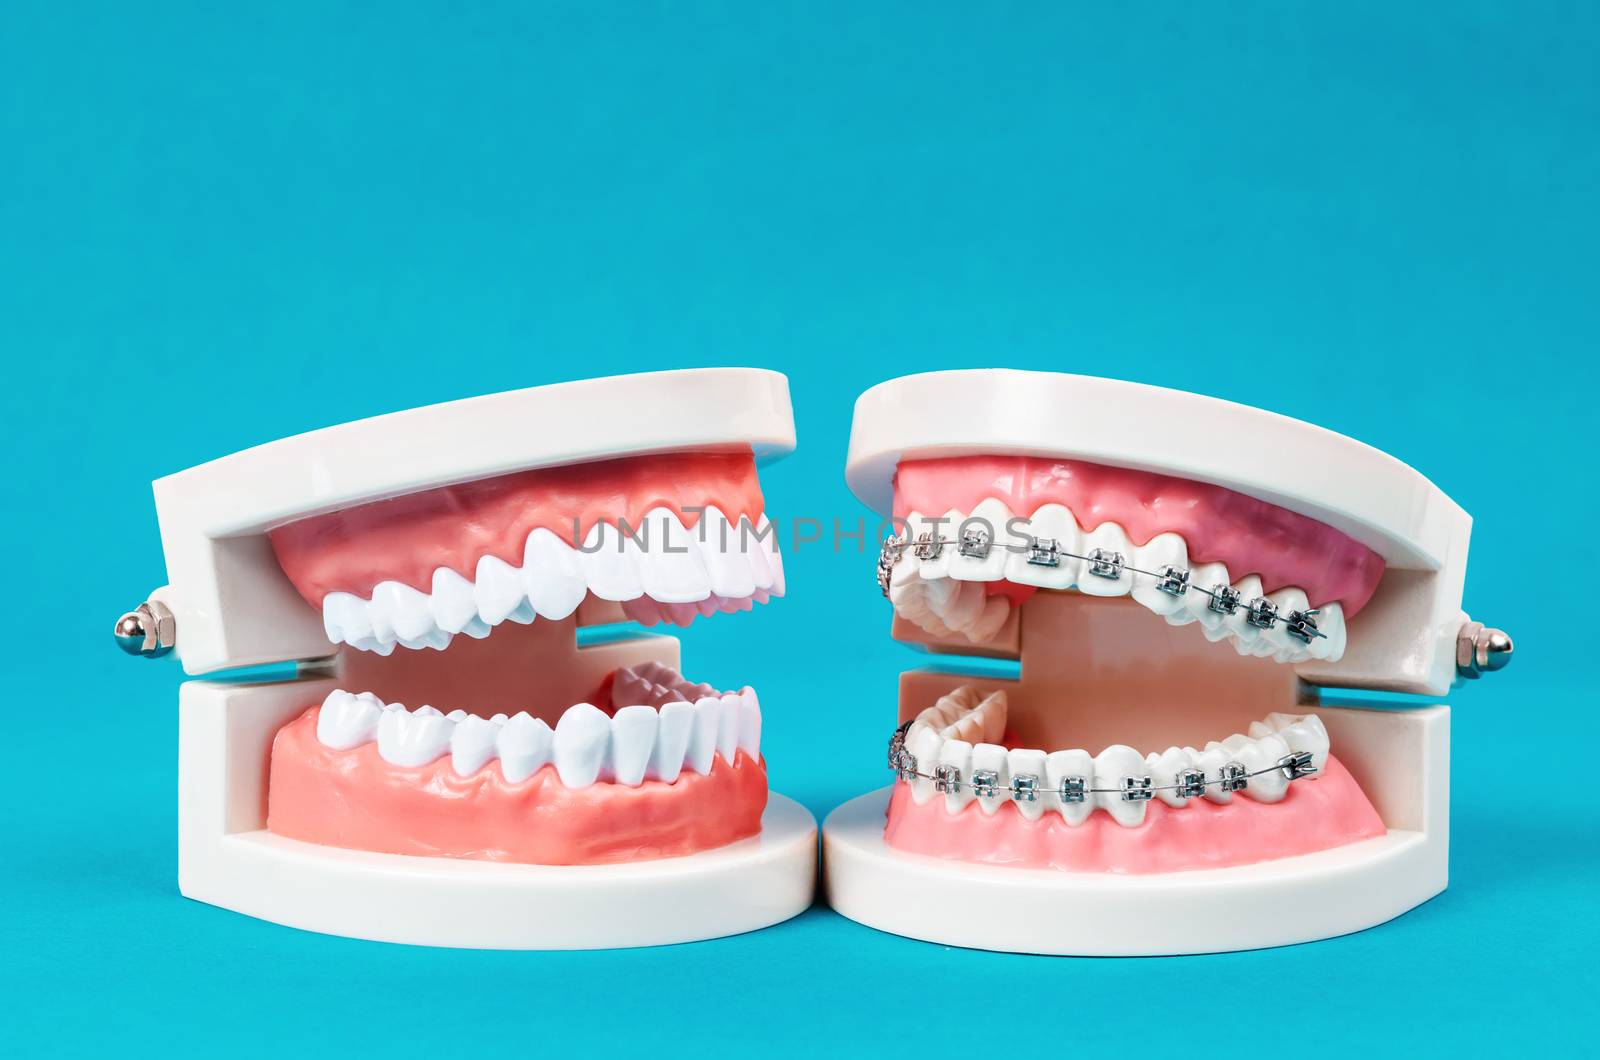 Compare tooth model and tooth model with metal wire dental braces on blue background.